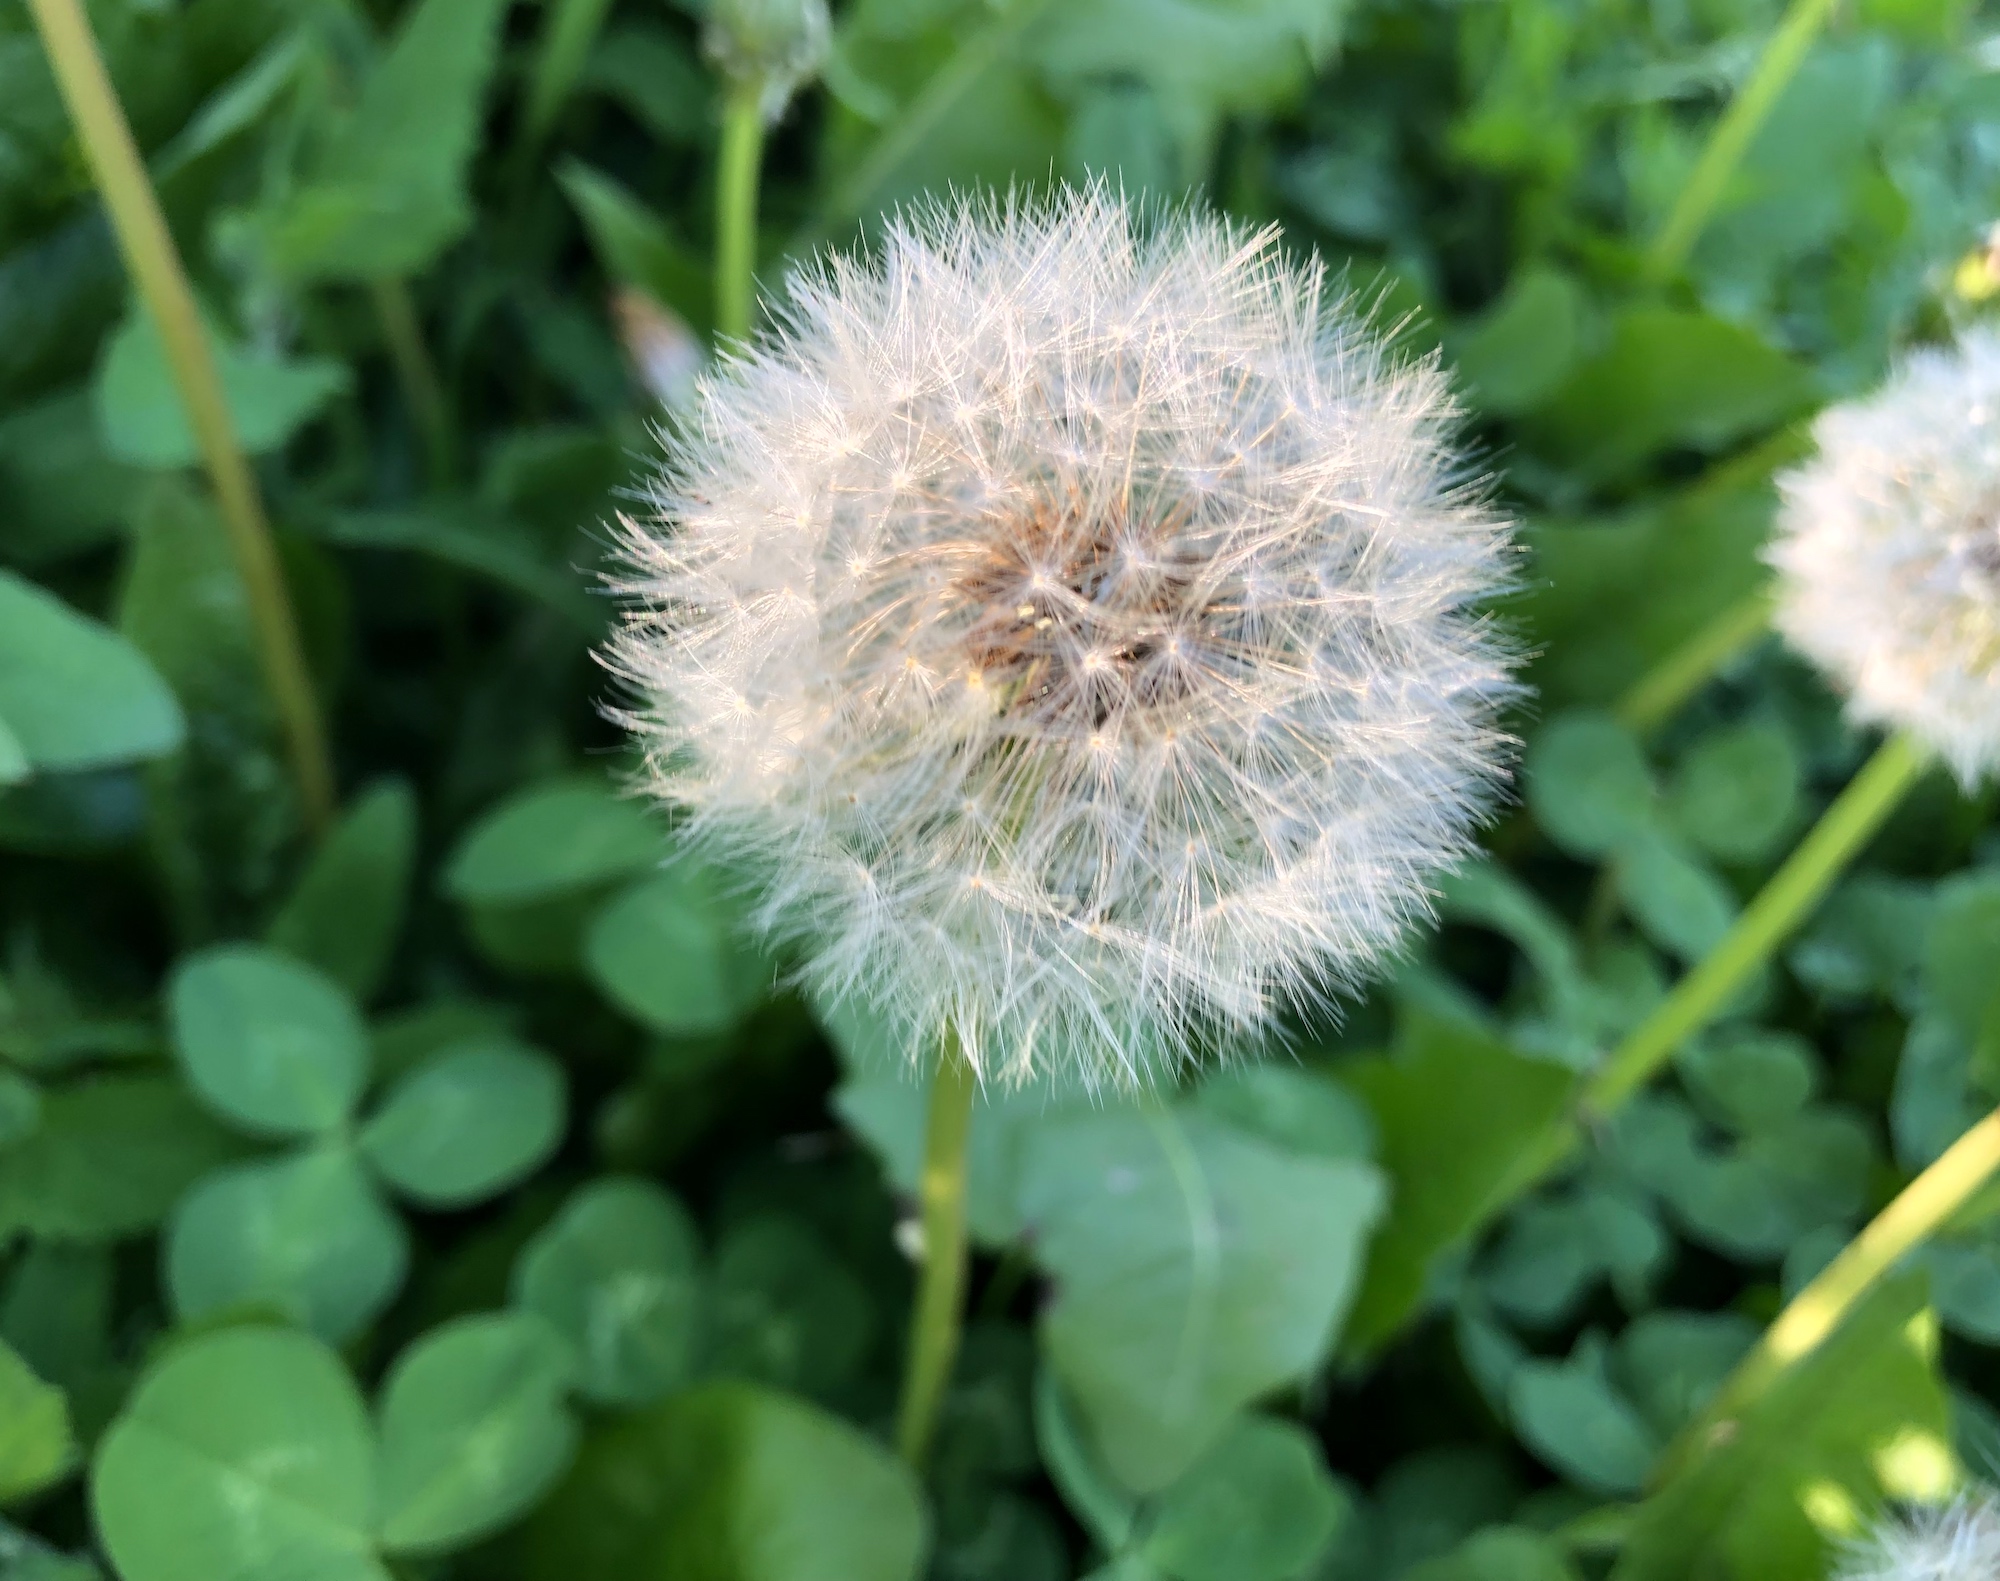 Dandelion puffball in Nakoma Park in Madison, Wisconsin on May 26, 2020.